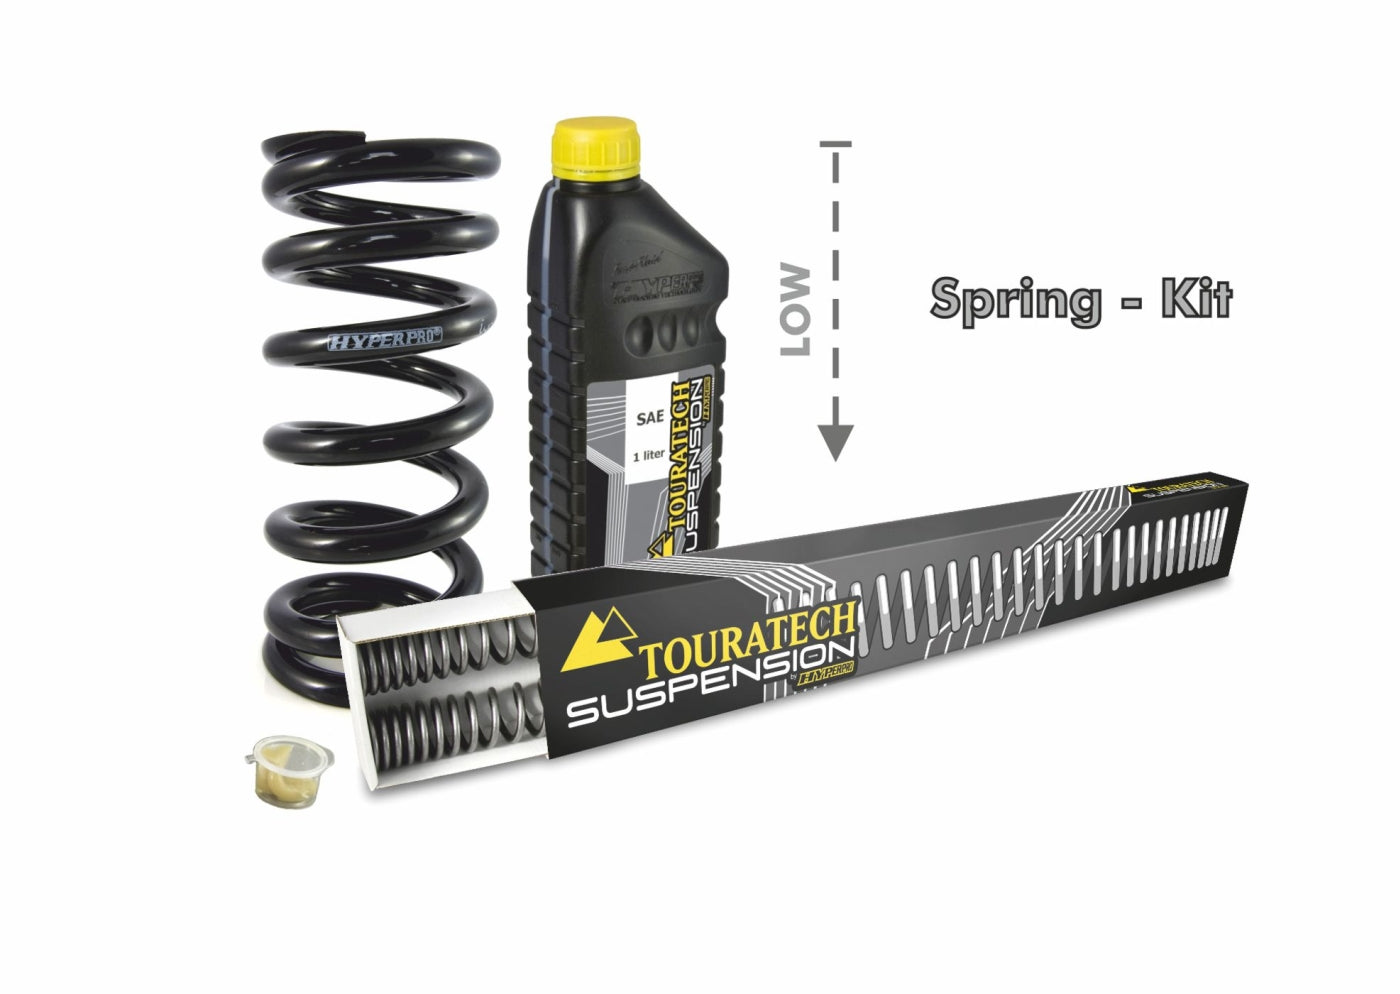 Touratech Suspension lowering kit -30mm for Triumph TIGER 1050 2007 - 2012